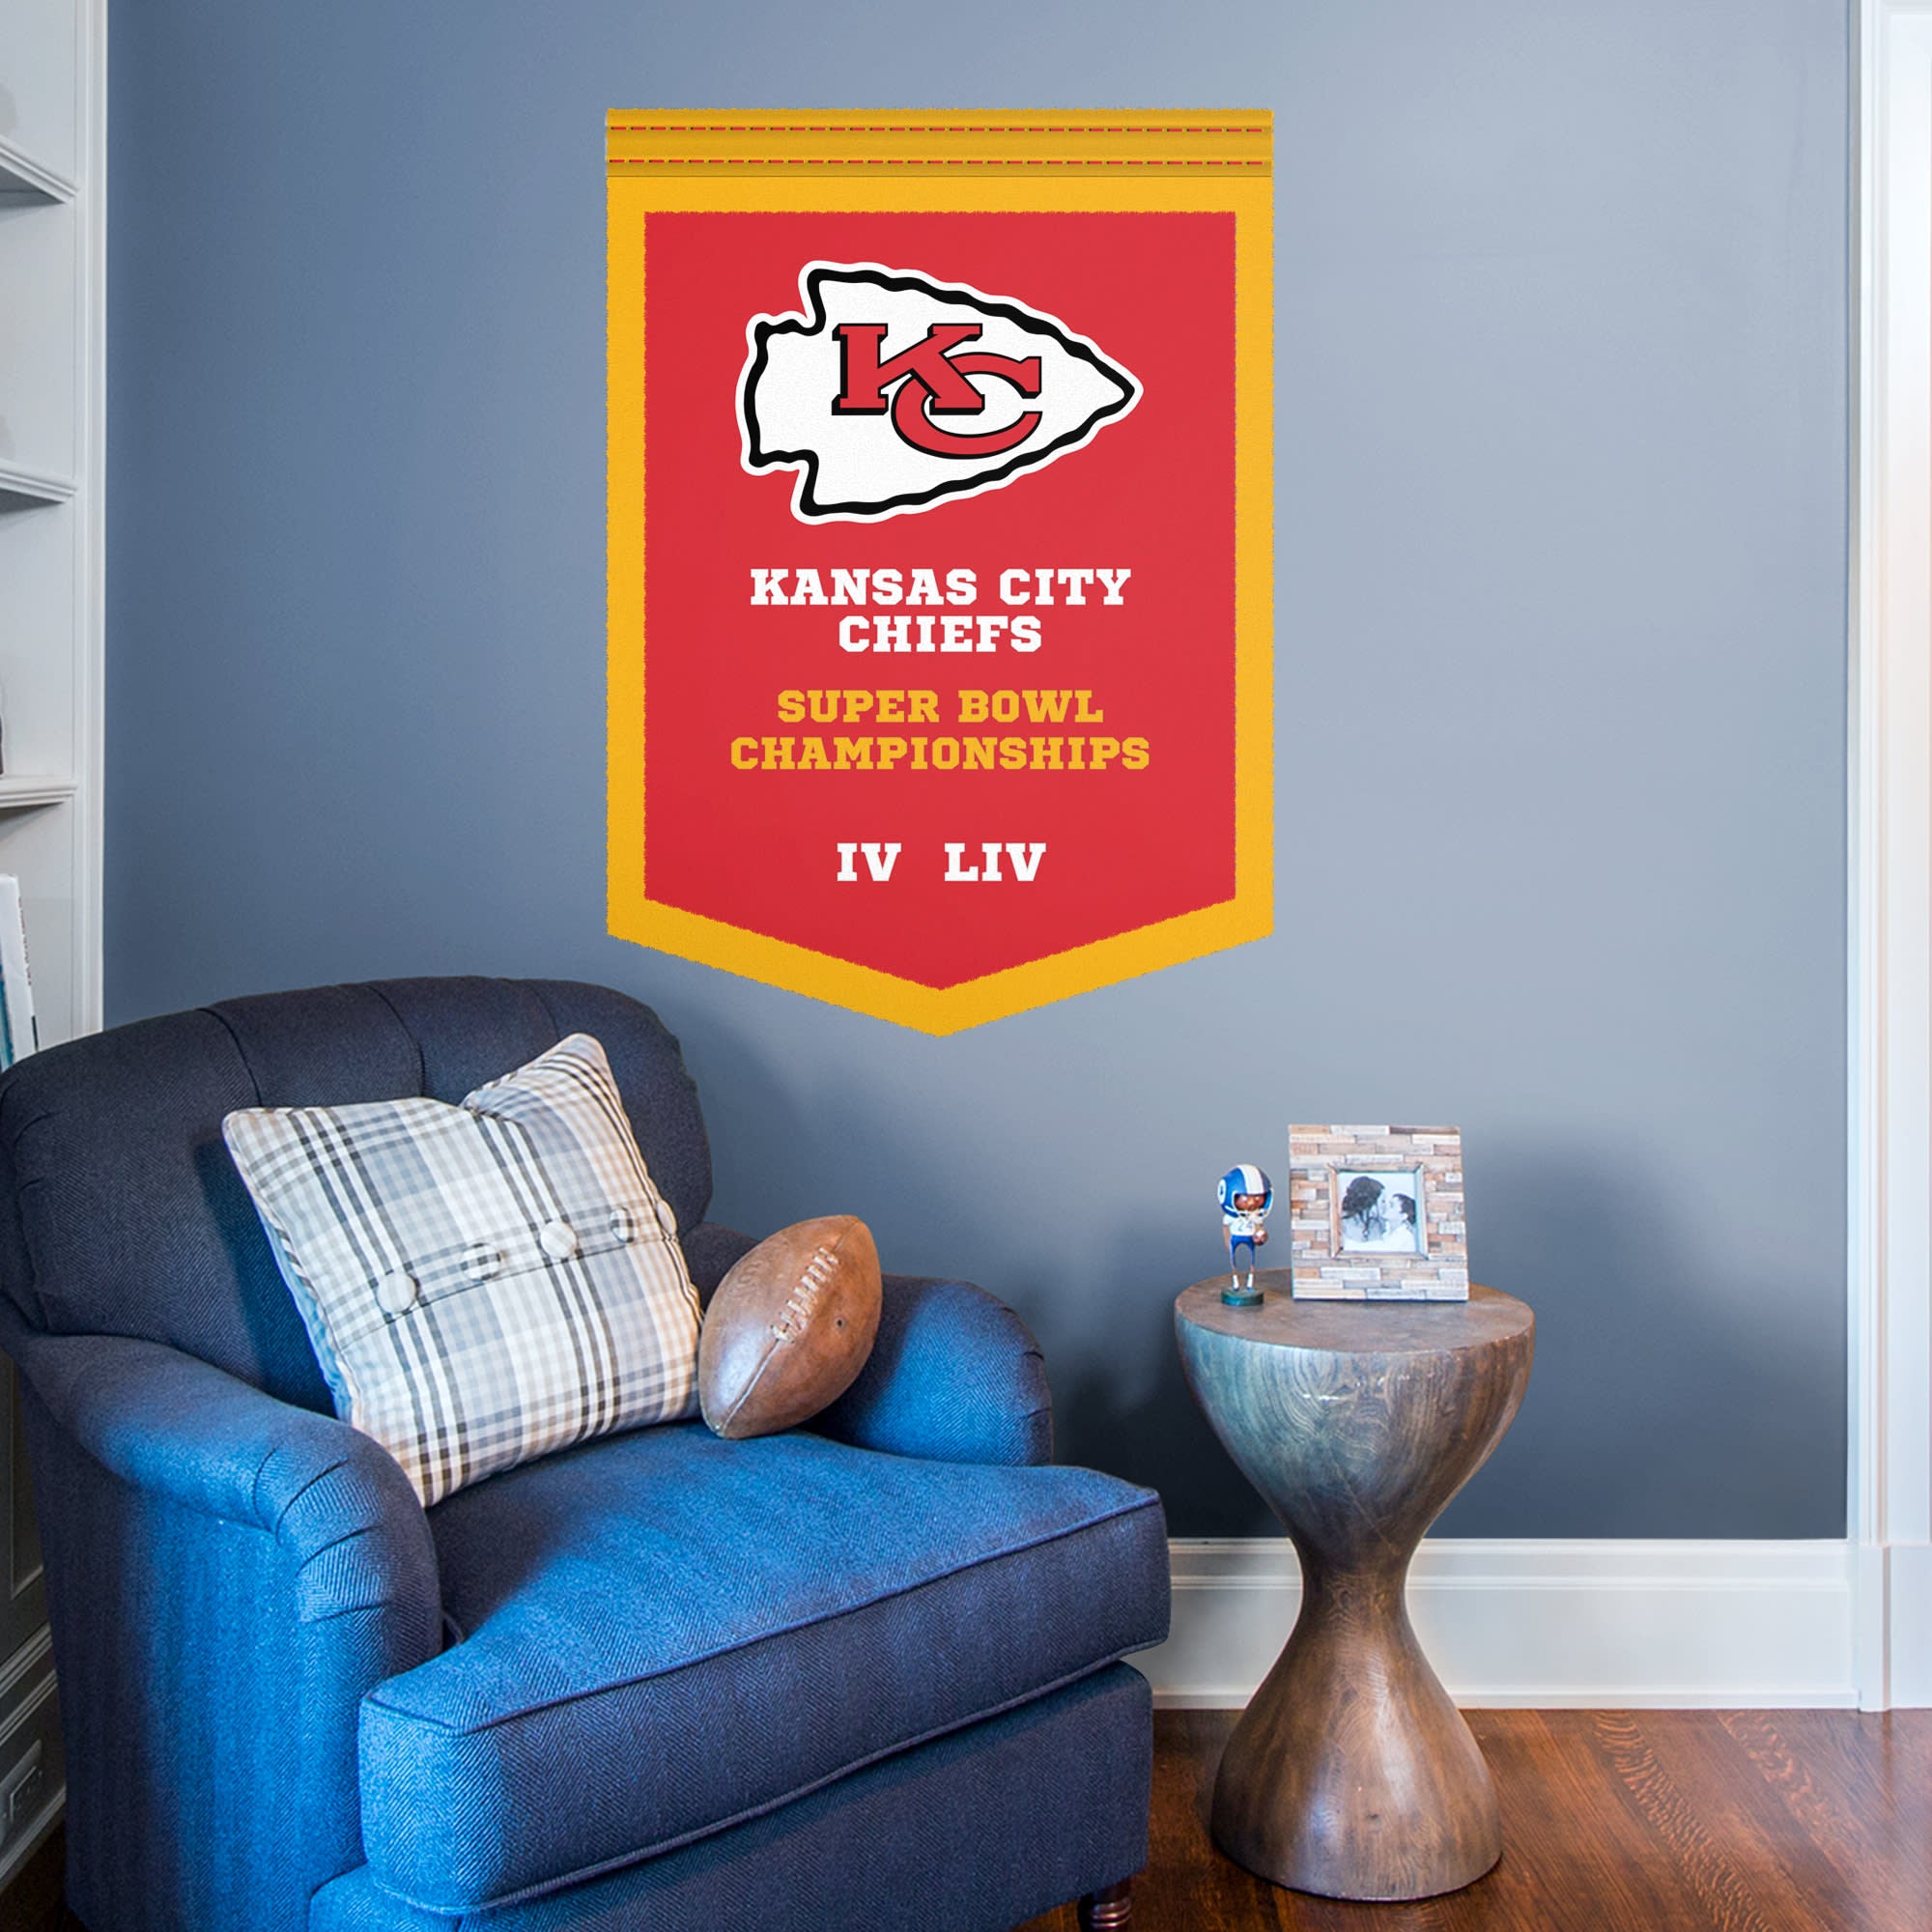 Kansas City Chiefs: Super Bowl Champions Banner - Officially Licensed NFL Removable Wall Decal 34.0"W x 48.0"H by Fathead | Viny